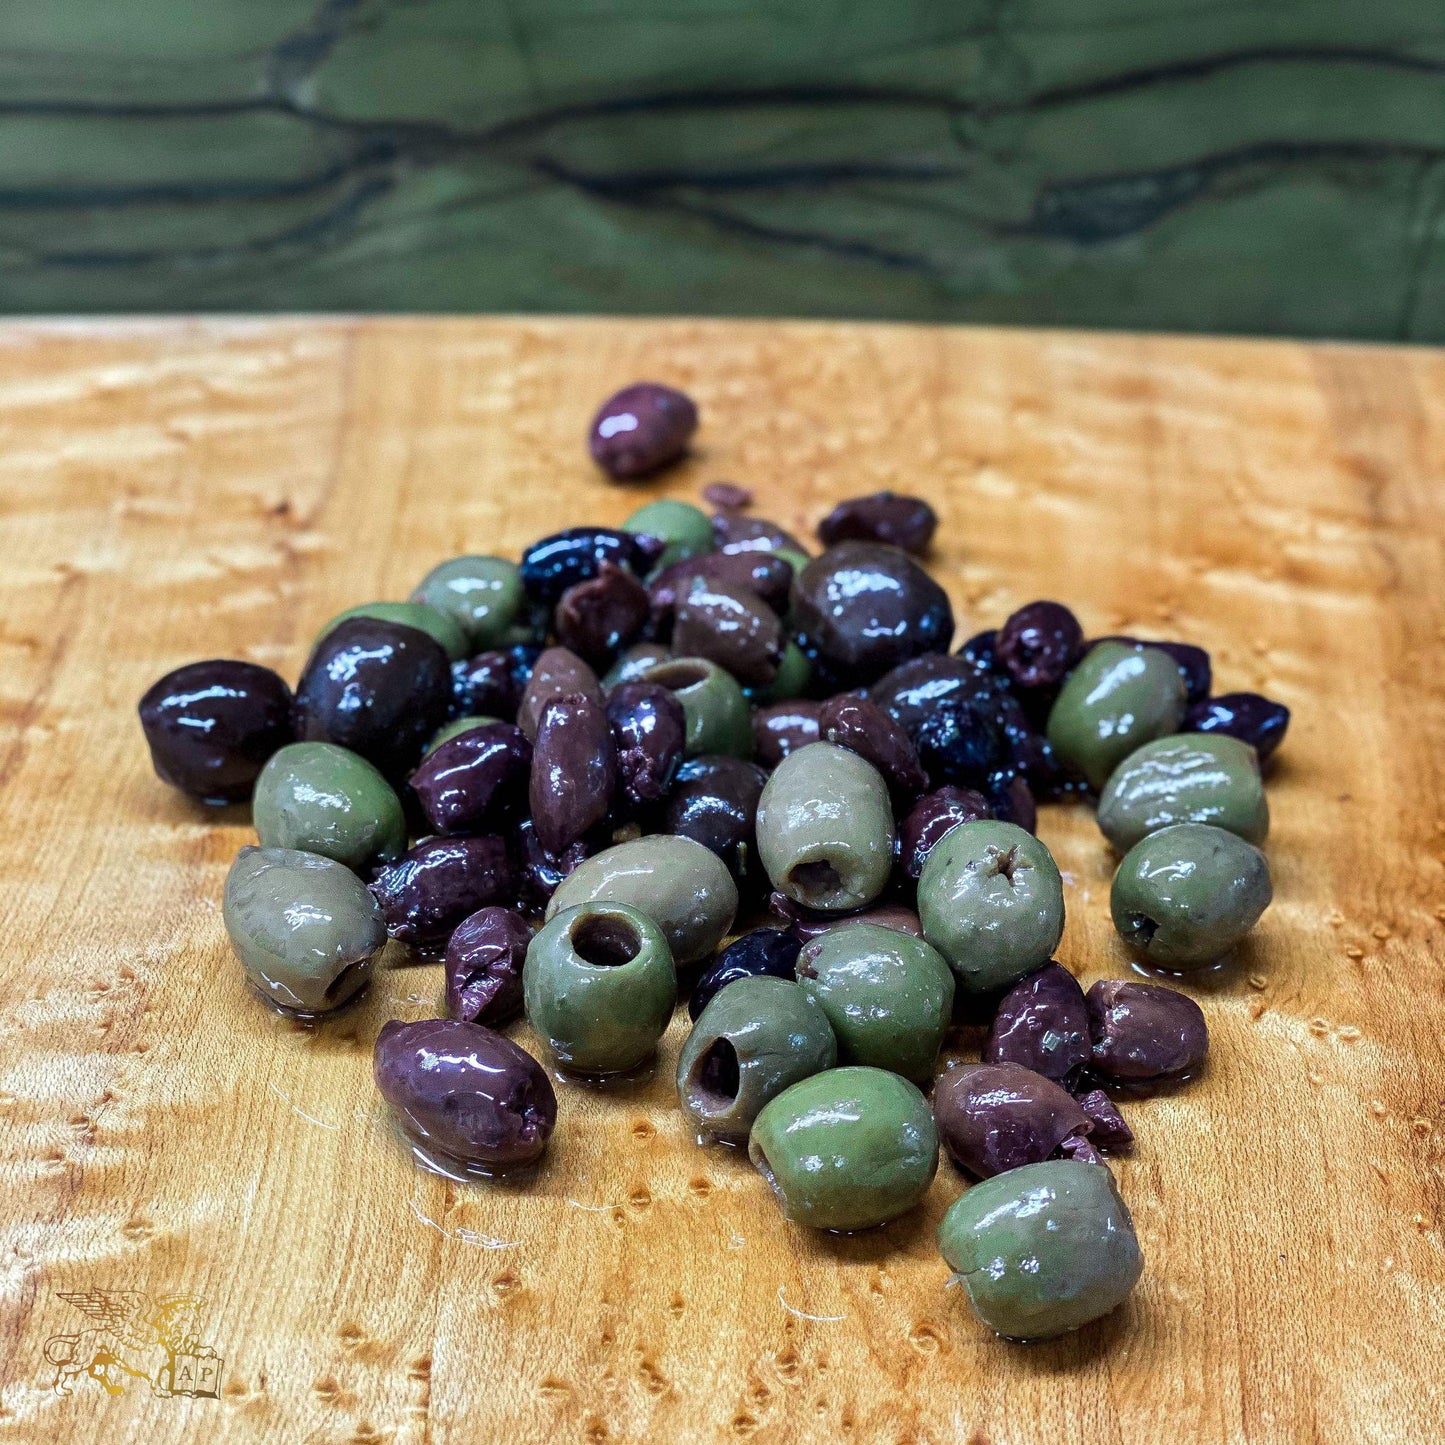 Pitted Mixed Olives